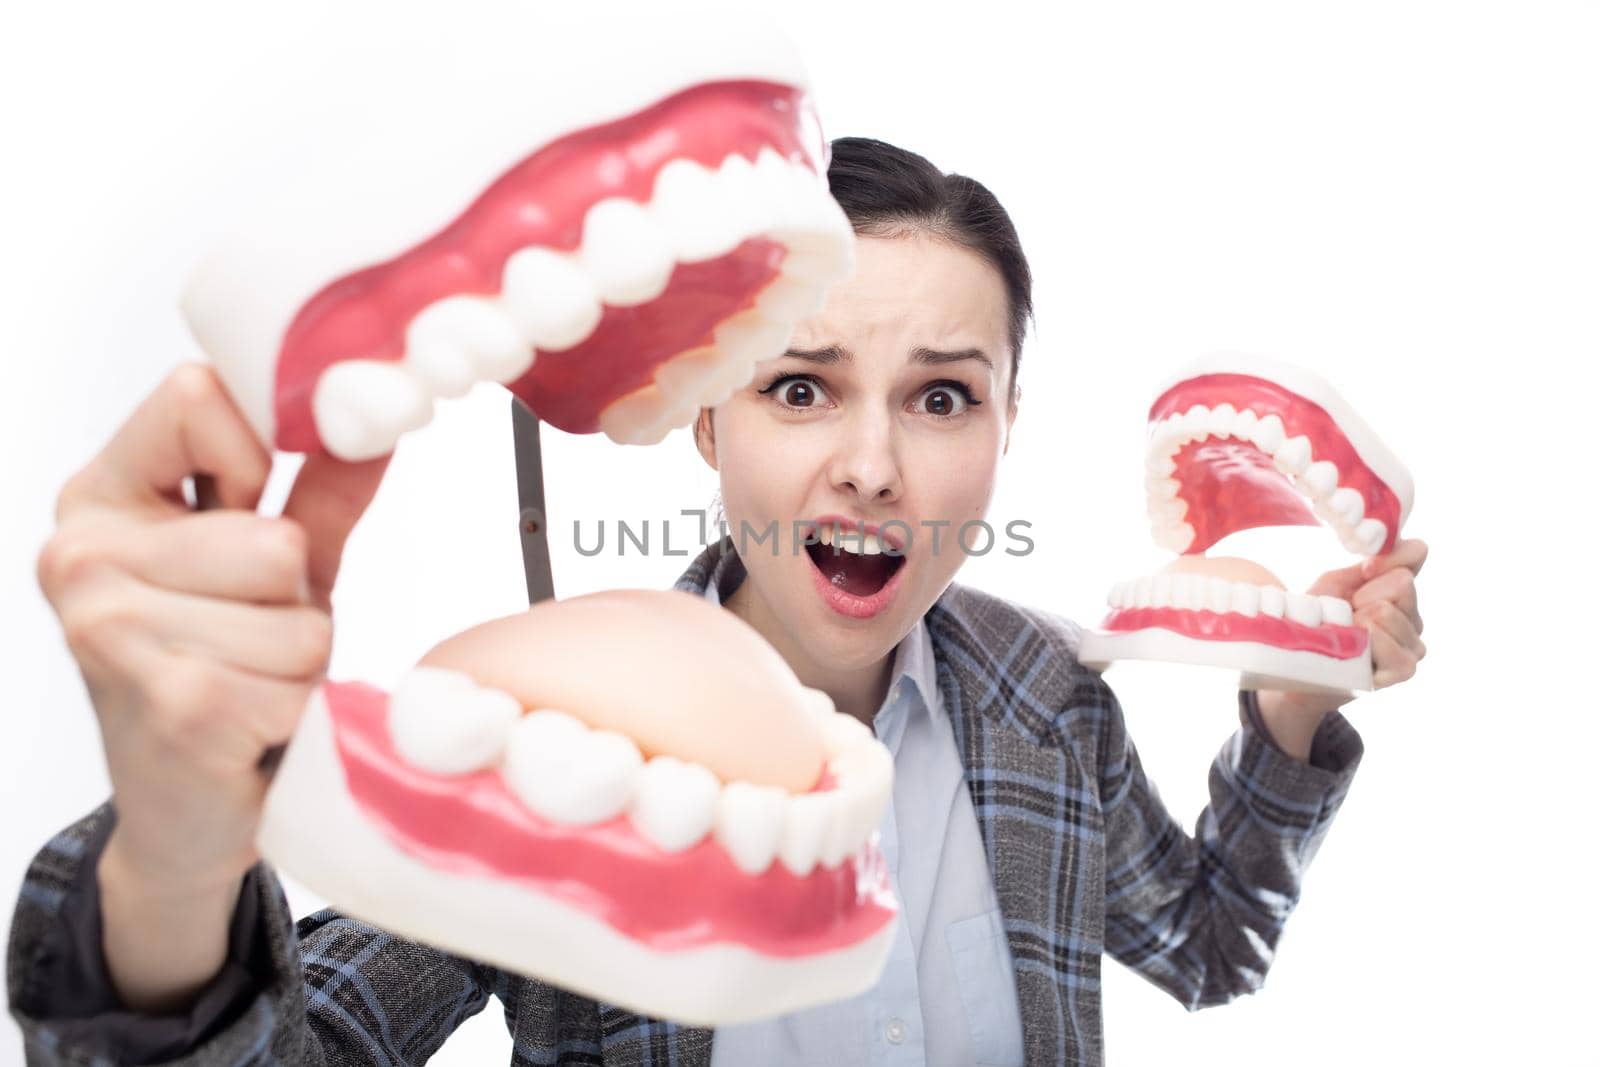 surprised woman in office suit holding dental models of the jaw in her hands, white background. High quality photo